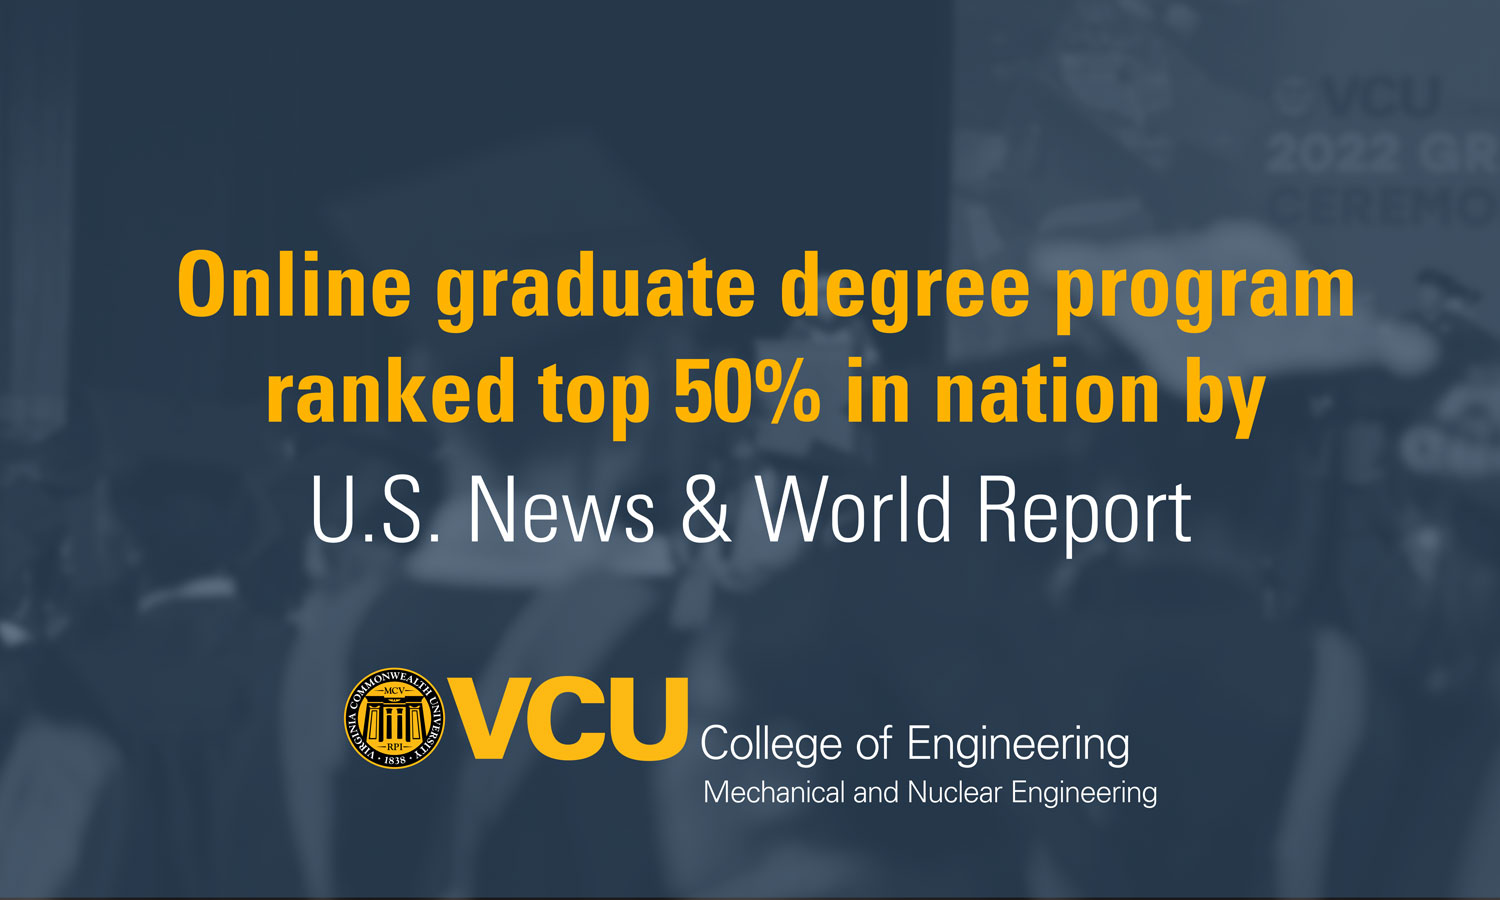 Online graduate degree program ranked top 50% in the nation by U.S. News & World Report